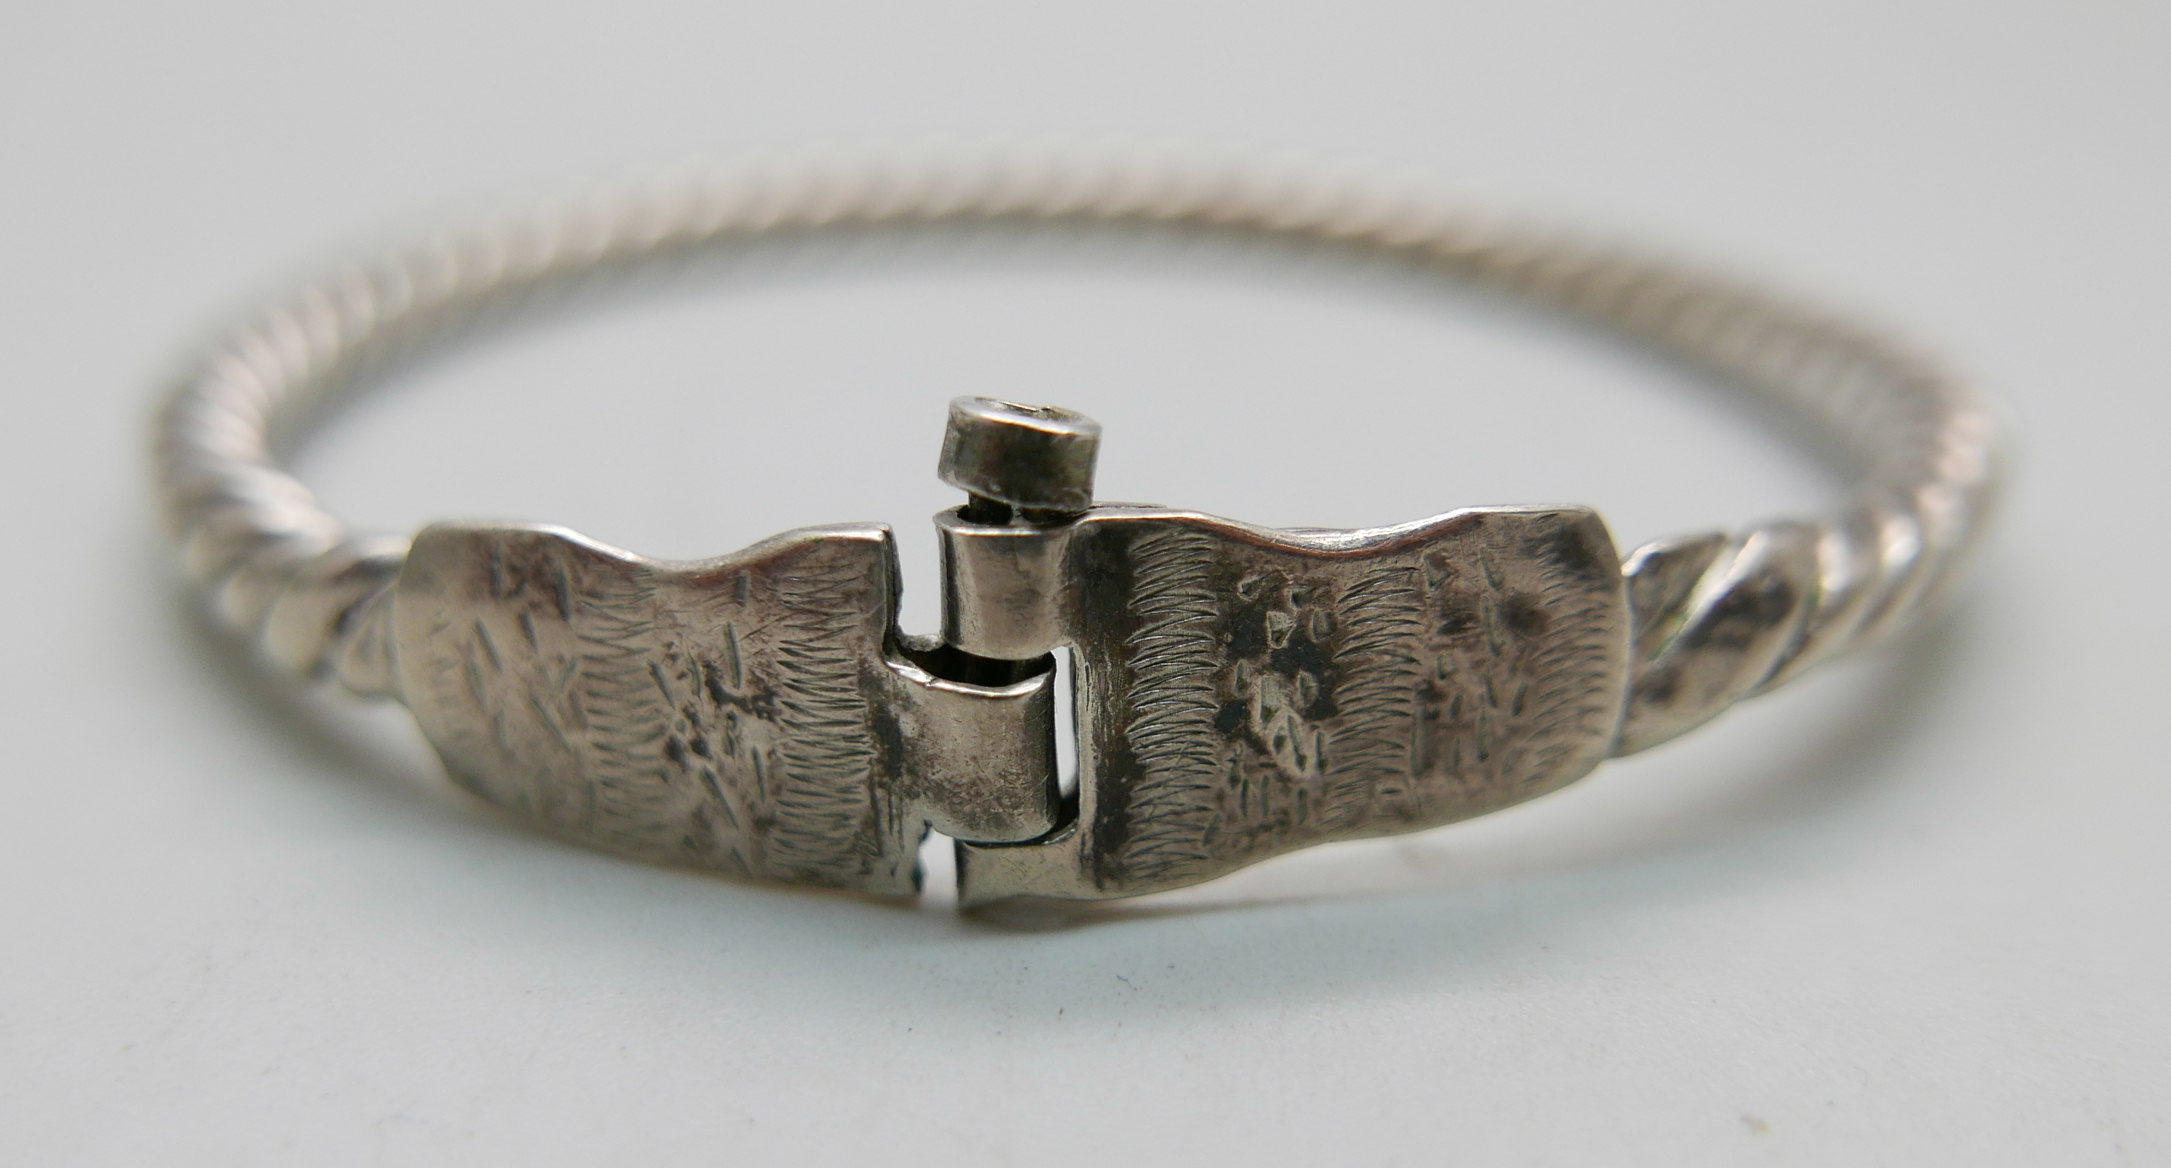 One vintage eastern inspired silver bangle with temples, elephants, etc., and a silver cable - Image 4 of 4